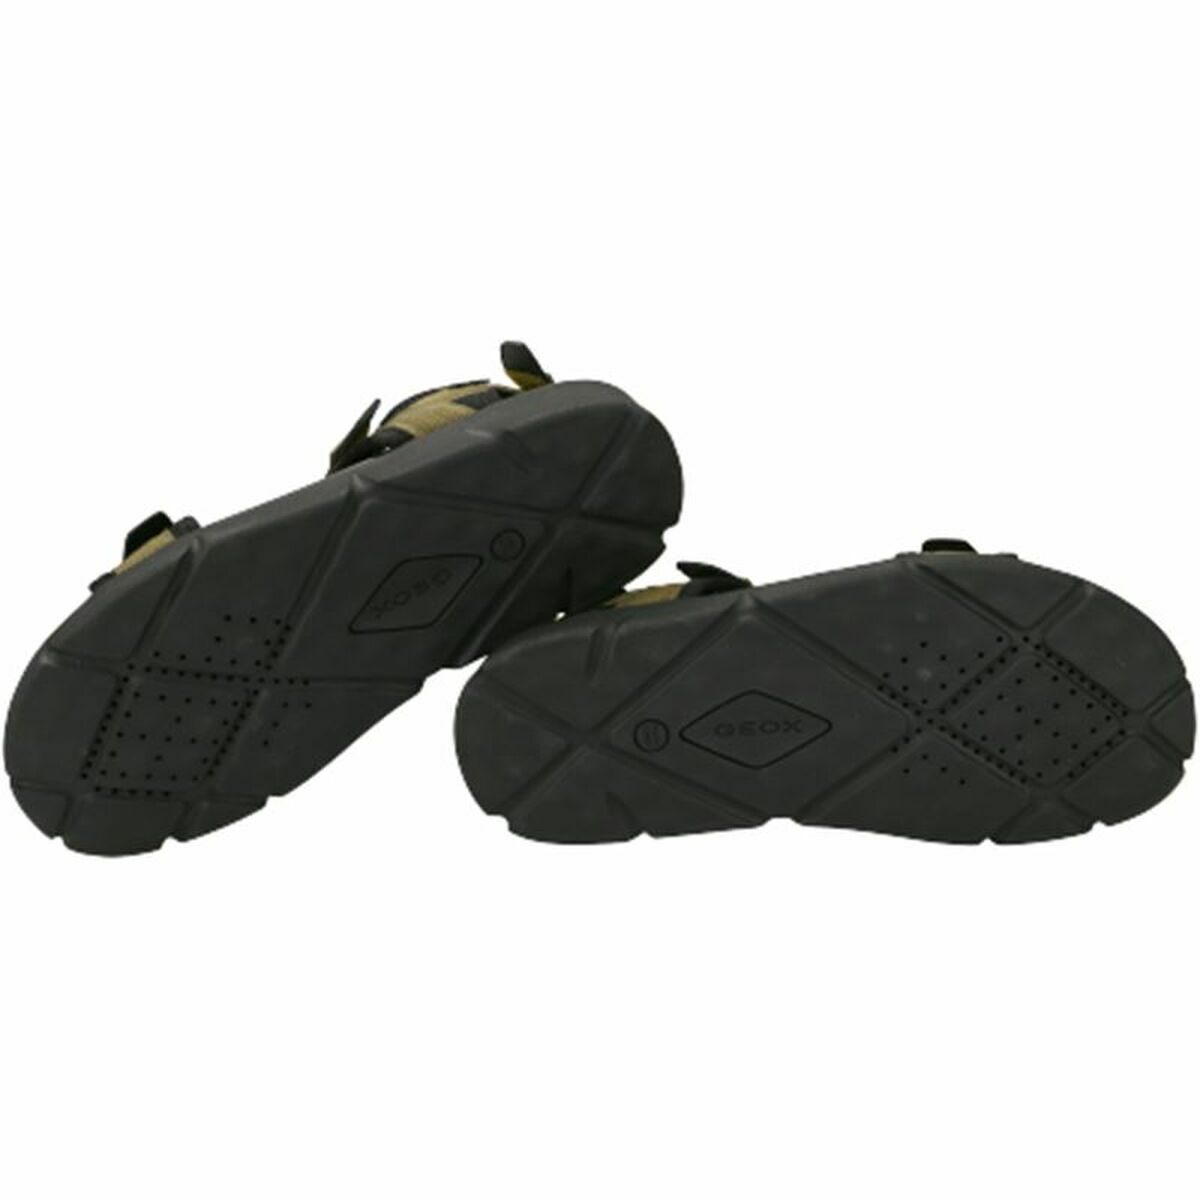 Mountain sandals Geox Xand 2S  Multicolour